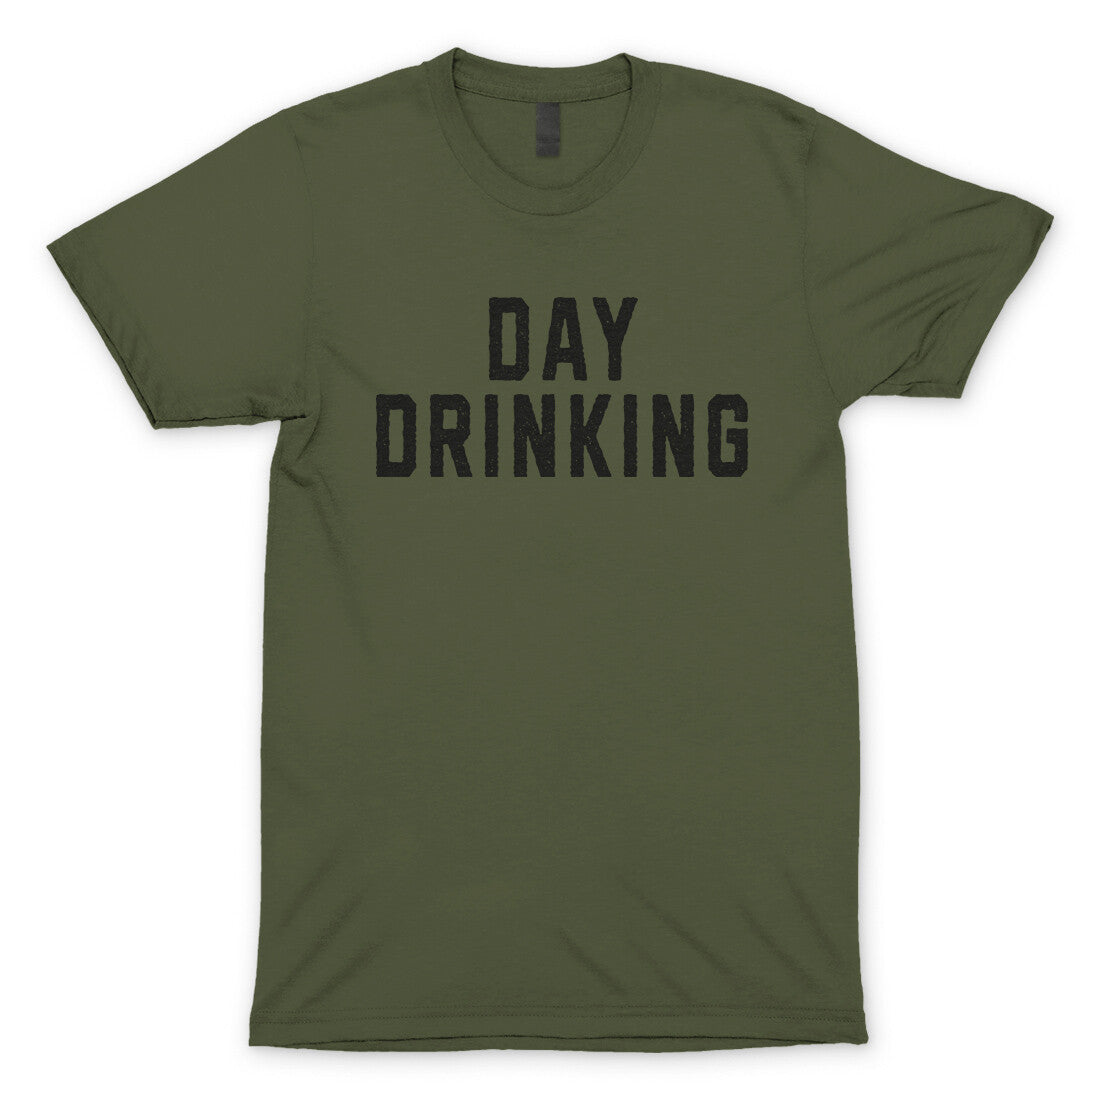 Day Drinking in Military Green Color